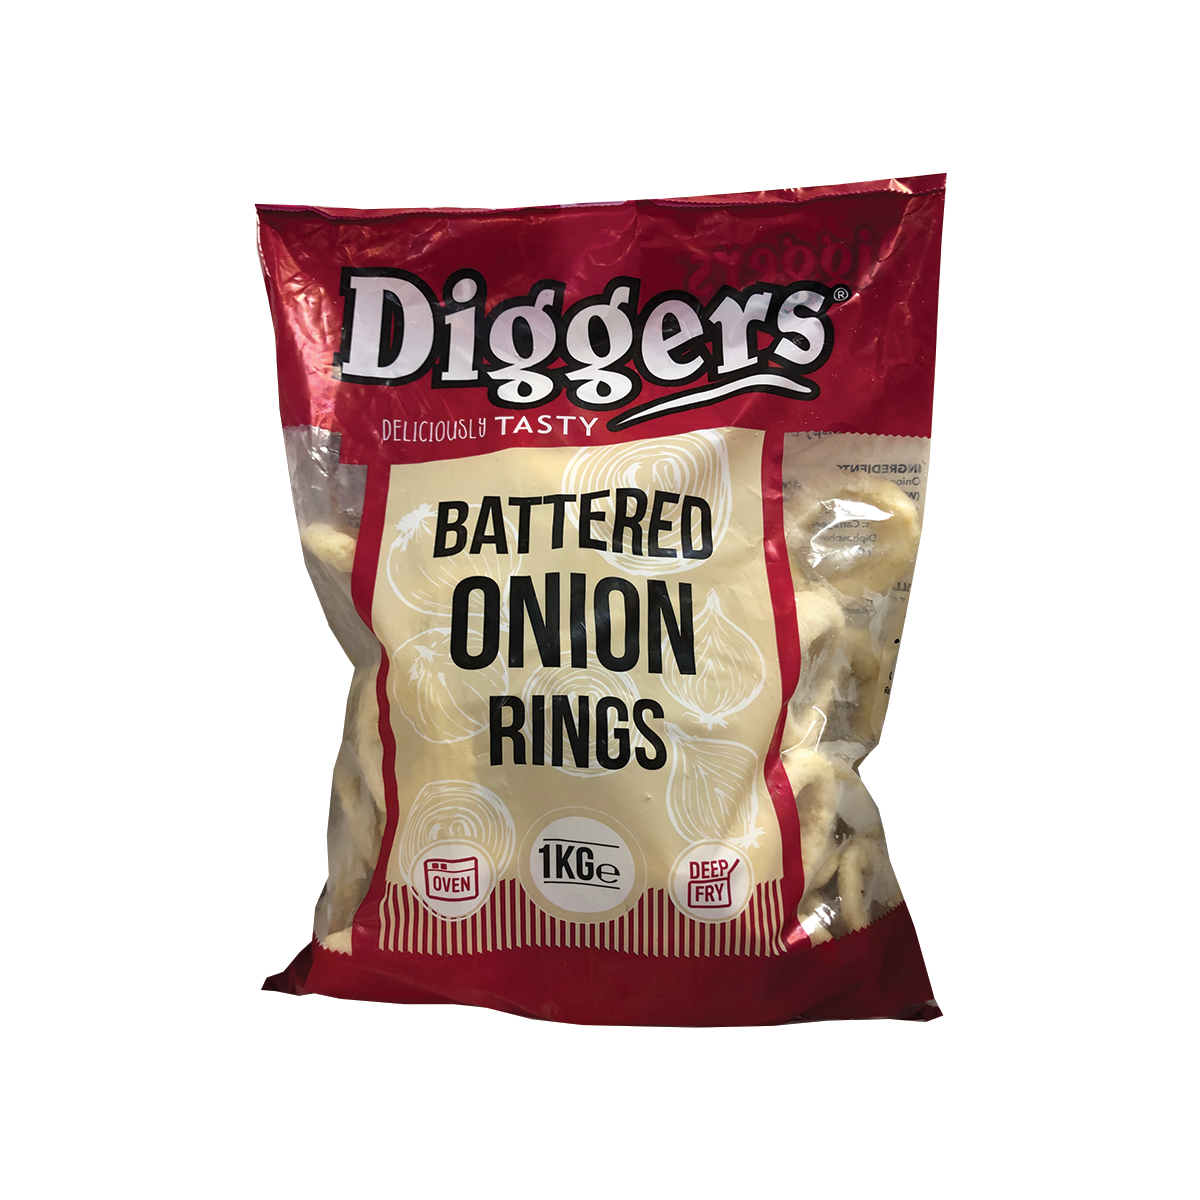 Diggers Battered Onion Rings